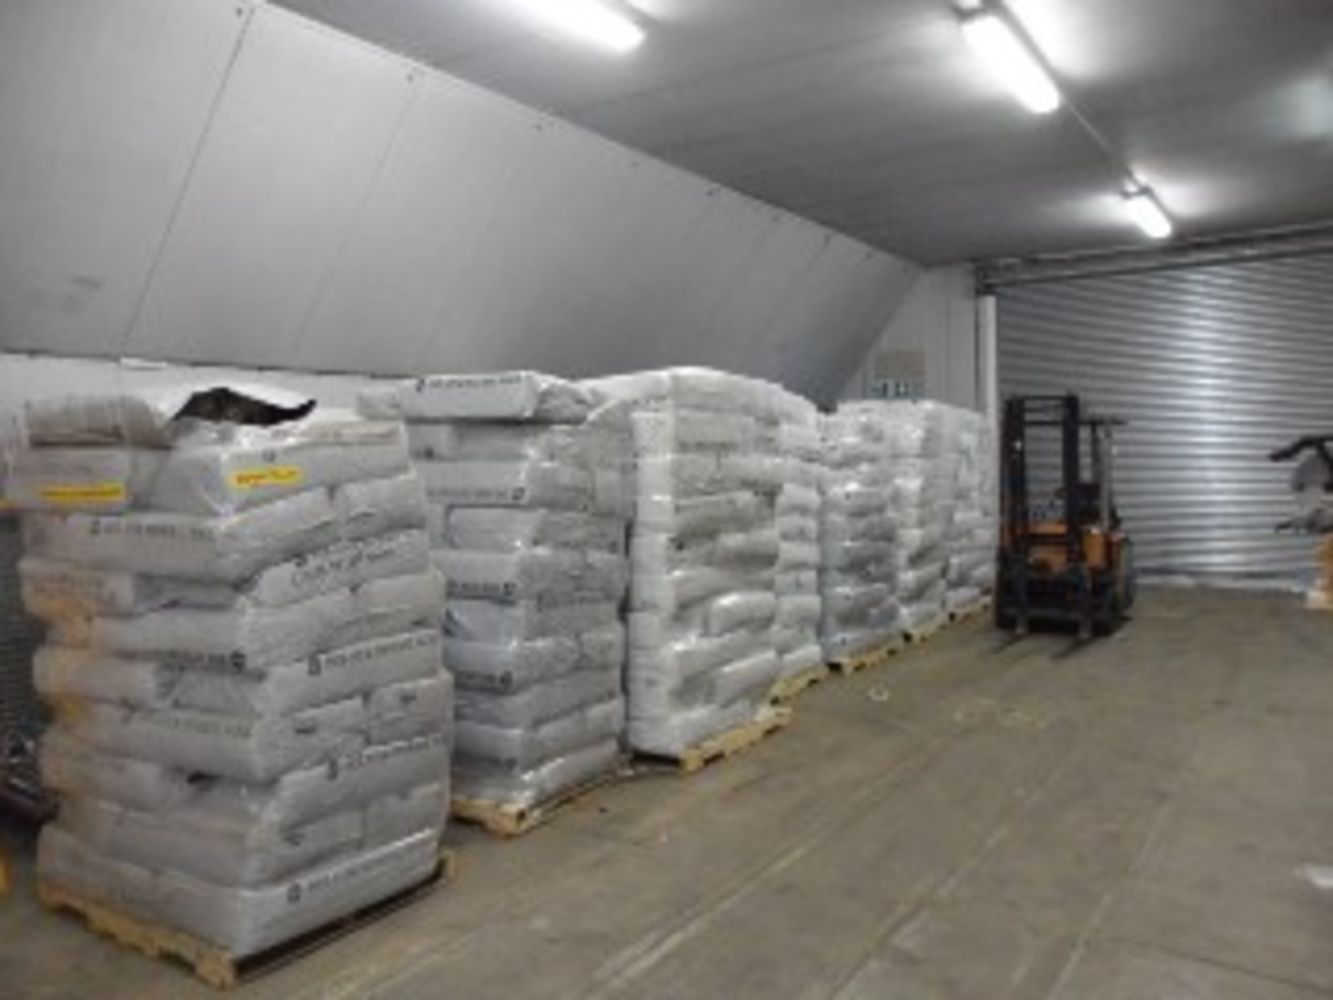 31 Pallets to Contain 573 Bags/Bails of Calco Isolatek Mineral Wool Insulation. RRP £100 Per Bail - SHORT NOTICE SALE